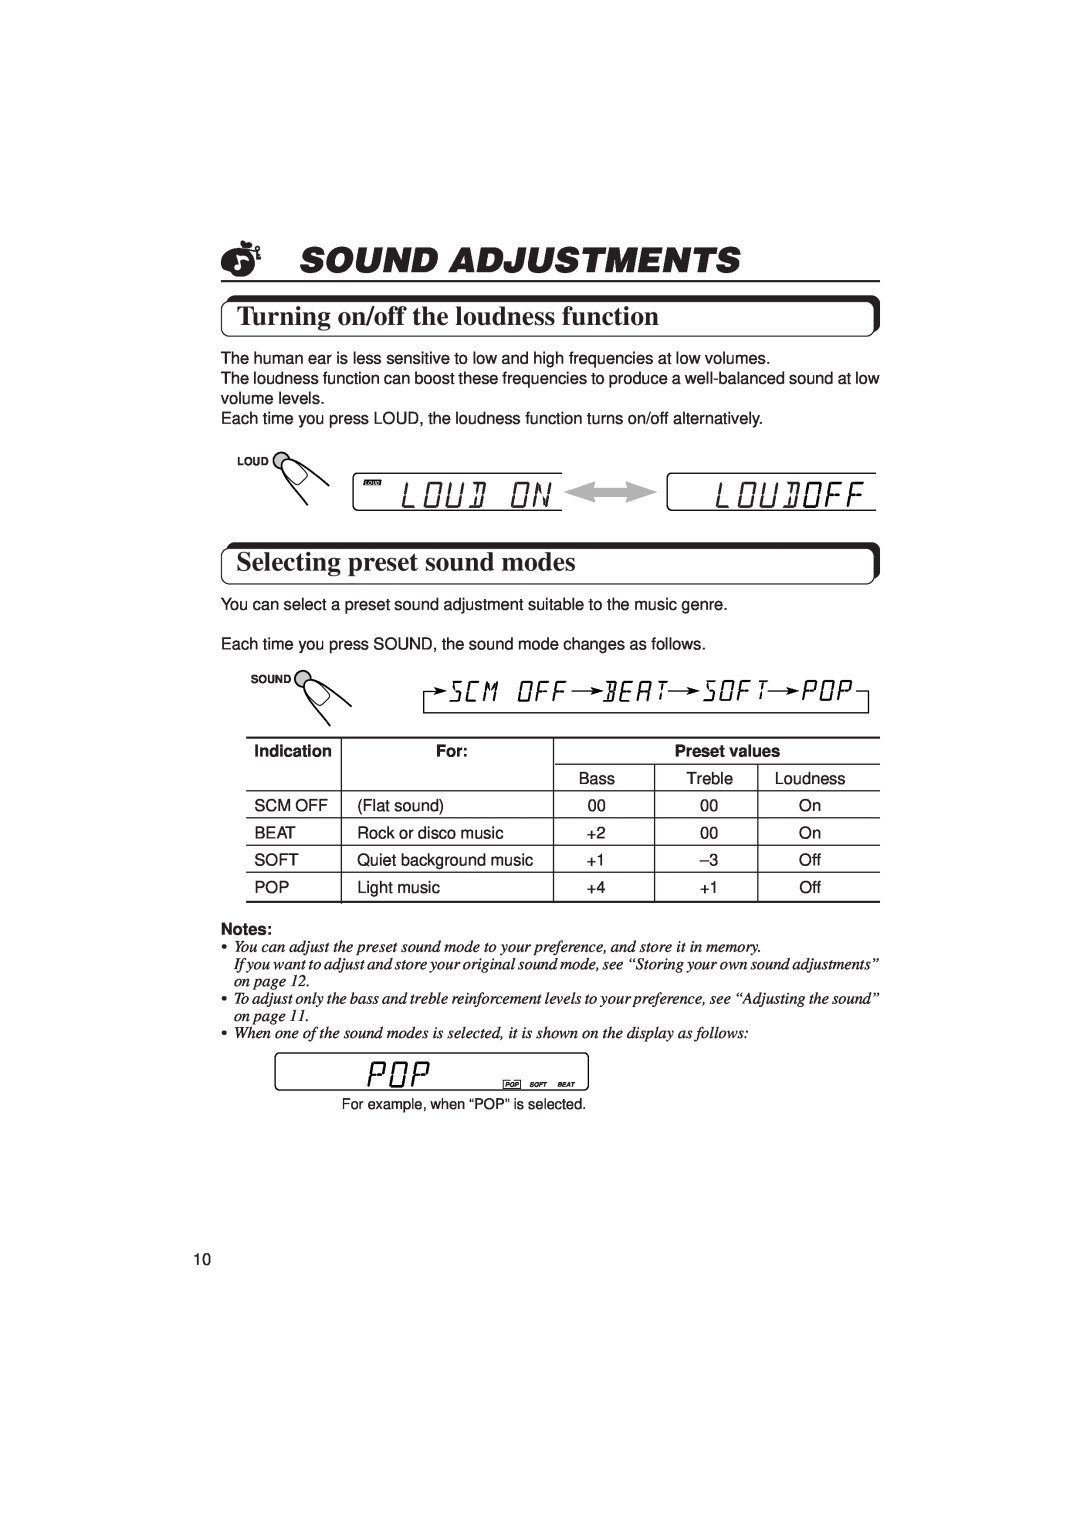 JVC KS F100 manual Sound Adjustments, Turning on/off the loudness function, Selecting preset sound modes, Indication 